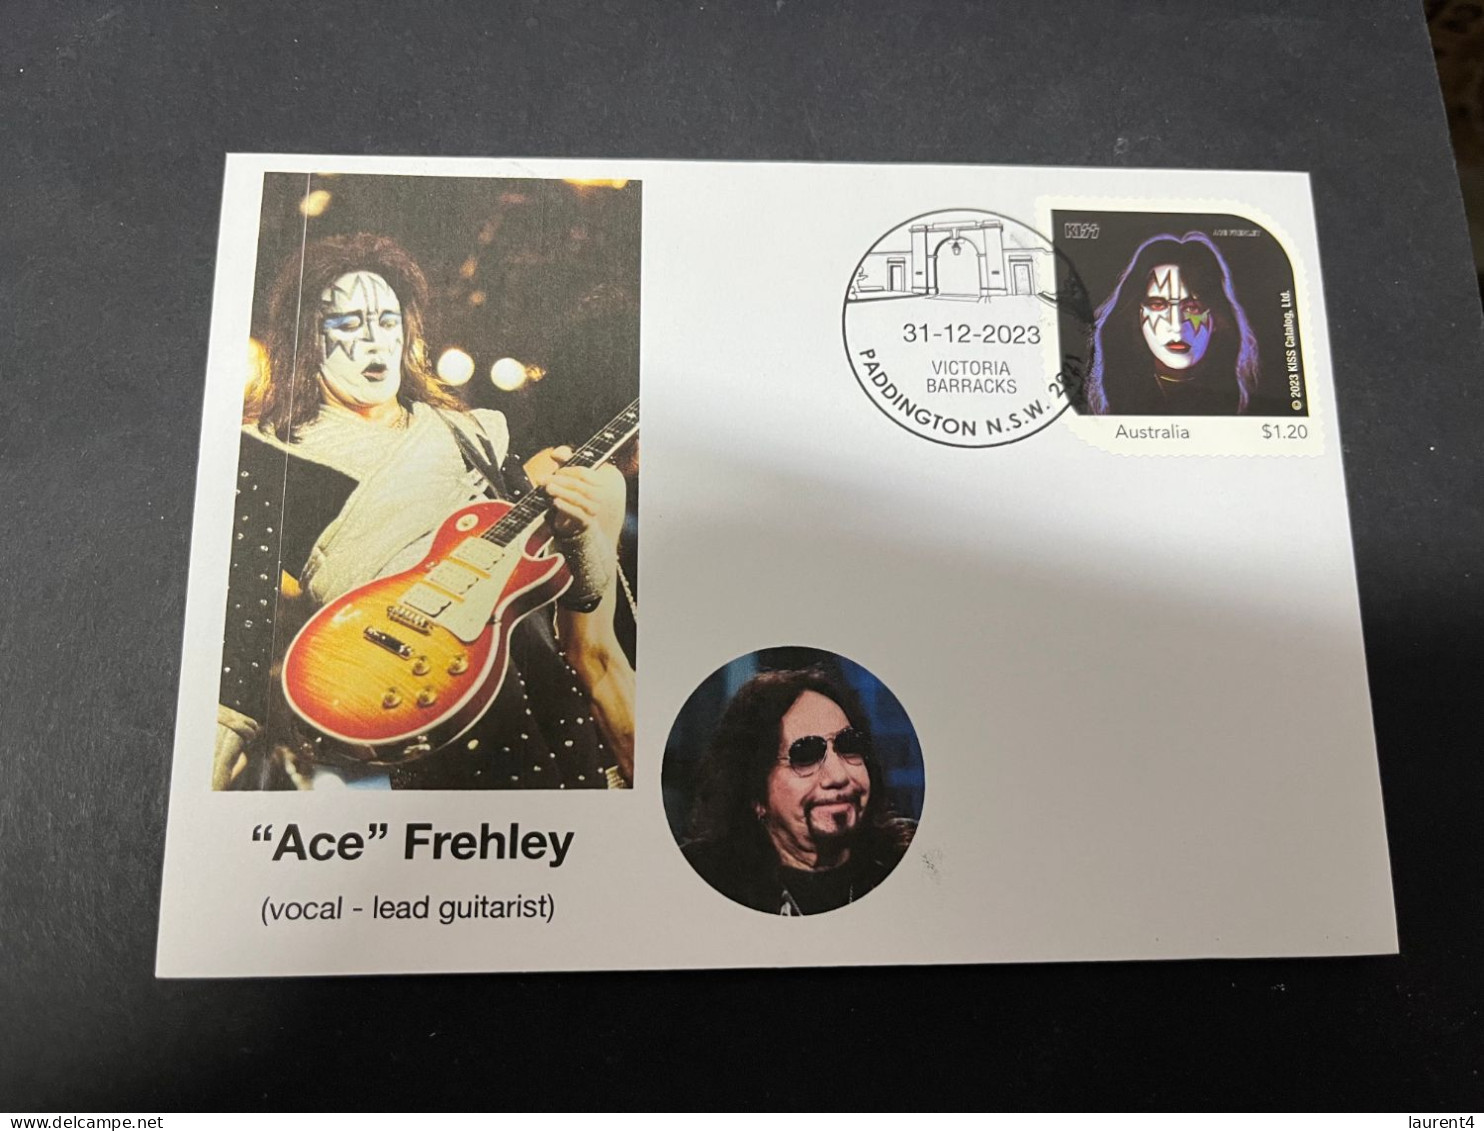 26-3-20234 (4 Y 8) Kiss (music Band) With KISS OZ Stamp ("Ace" Frehley) - Music